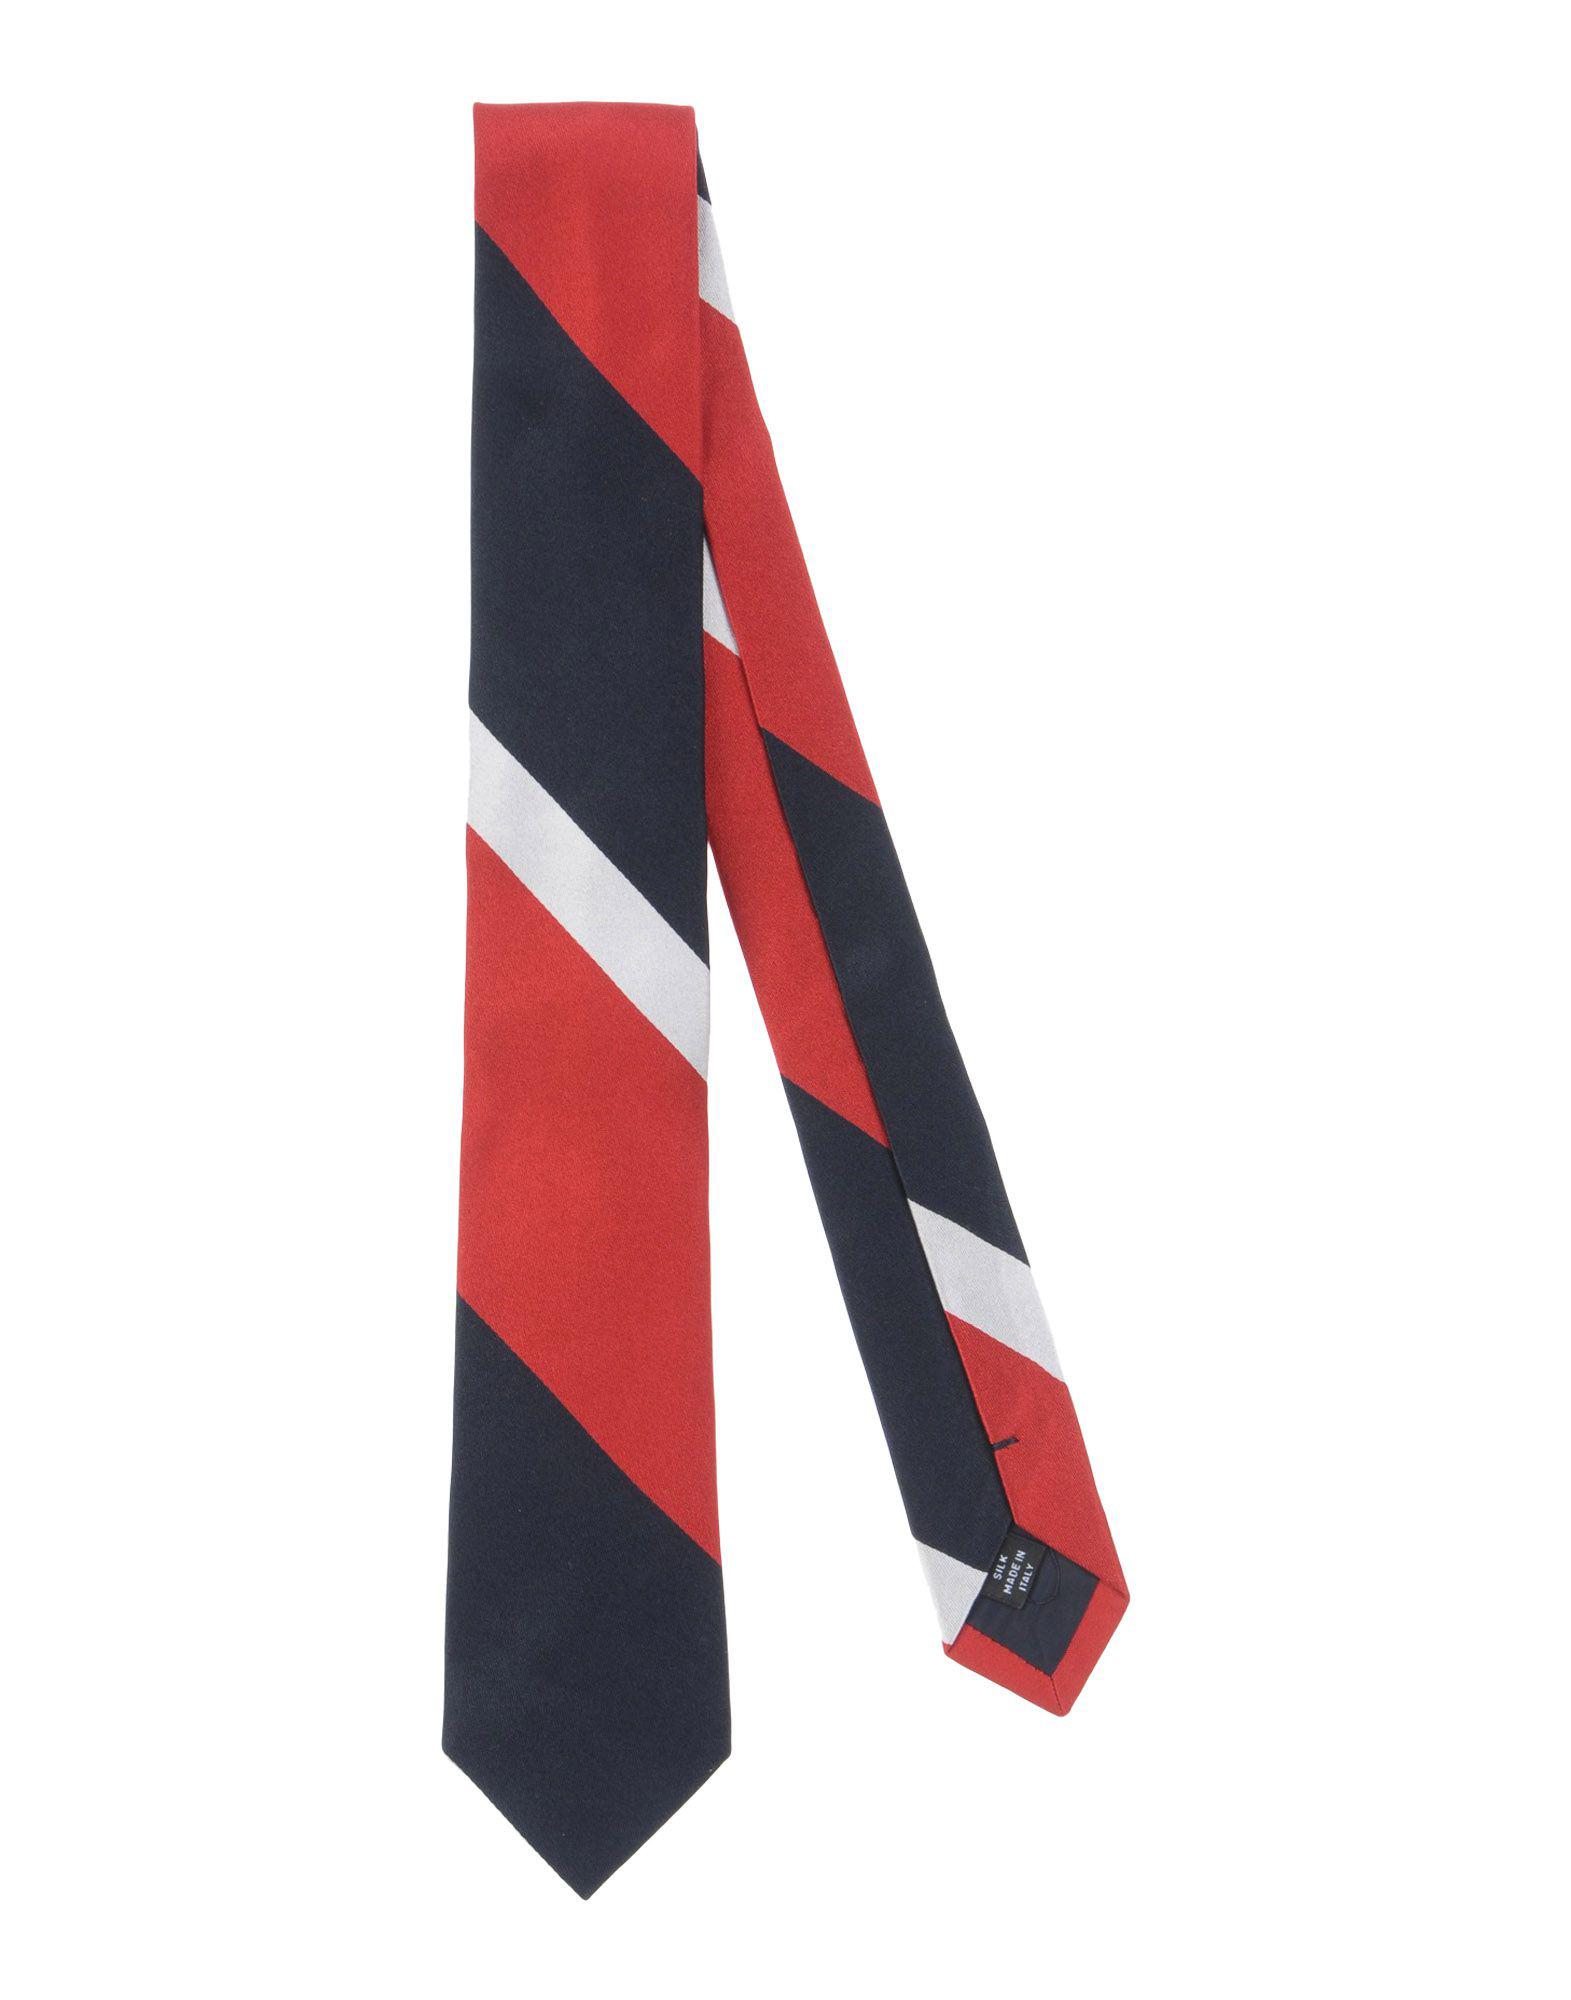 Moncler Satin Tie in Red for Men - Lyst